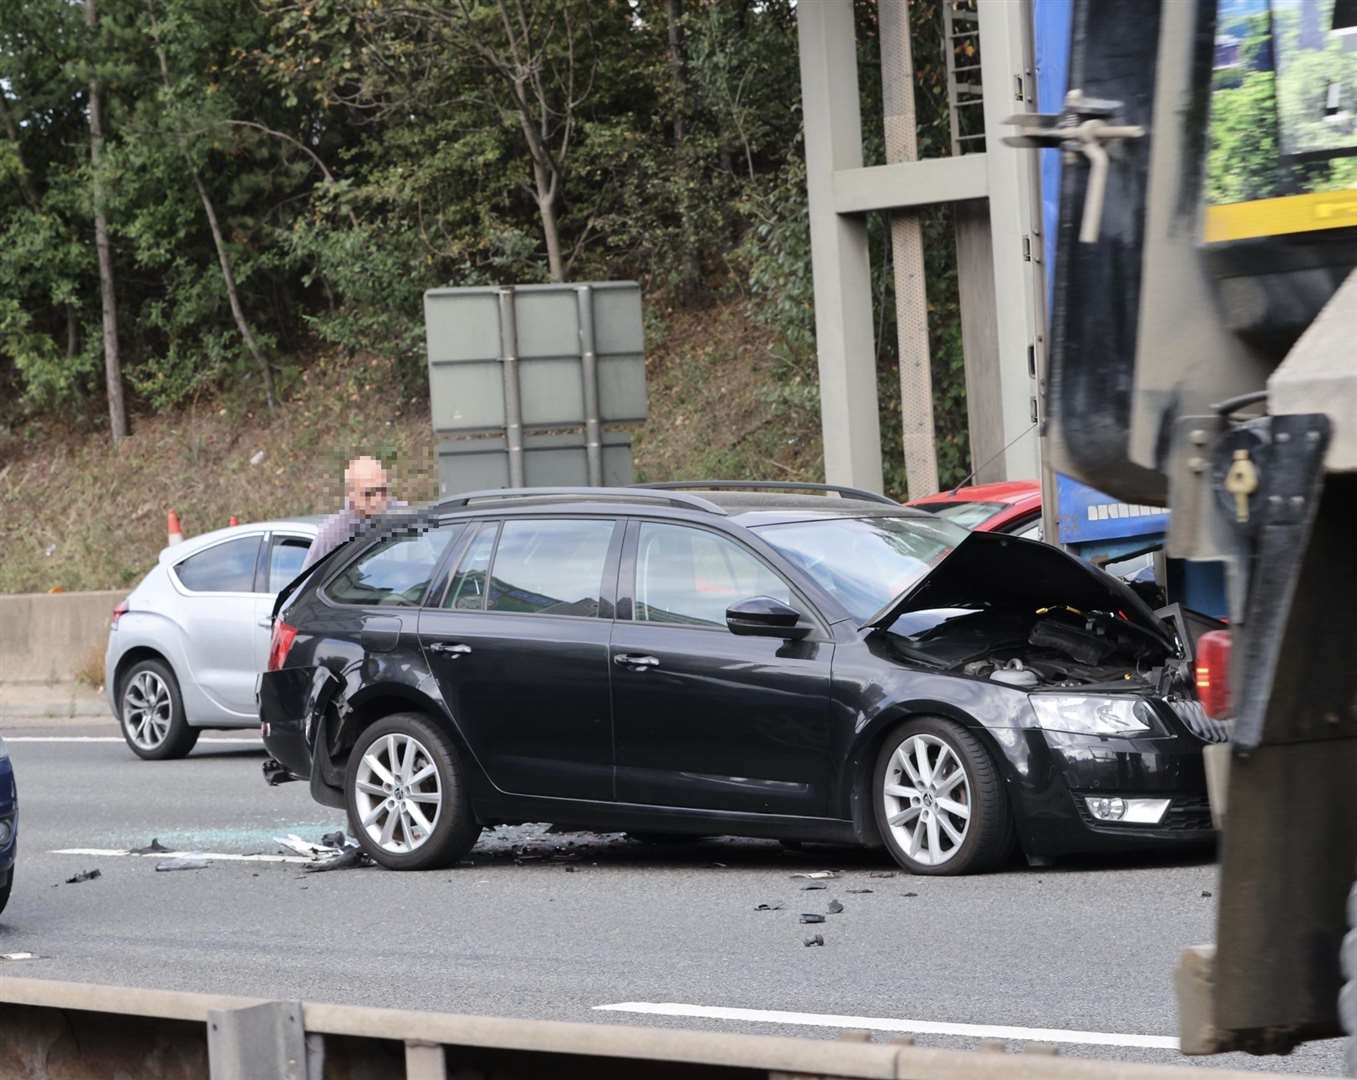 Paramedics were called and traffic officers are at the scene of a crash near the Dartford Crossing. Photo: UKNIP